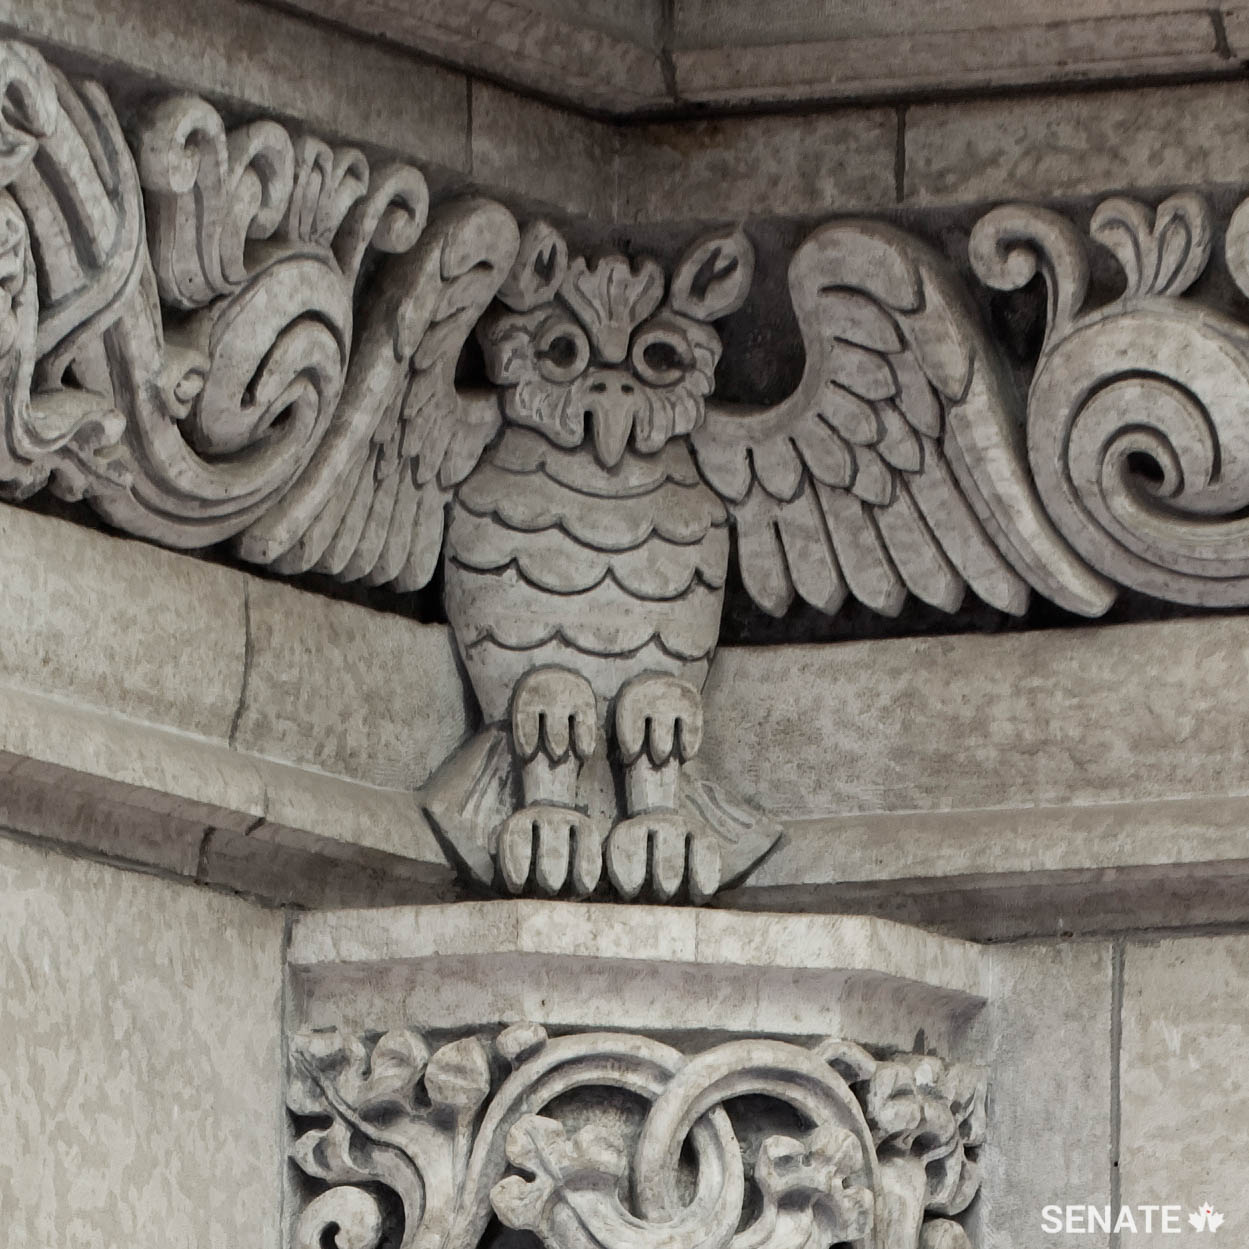 One of four owls that stand at the corners of the ceiling frieze in the Senate foyer.